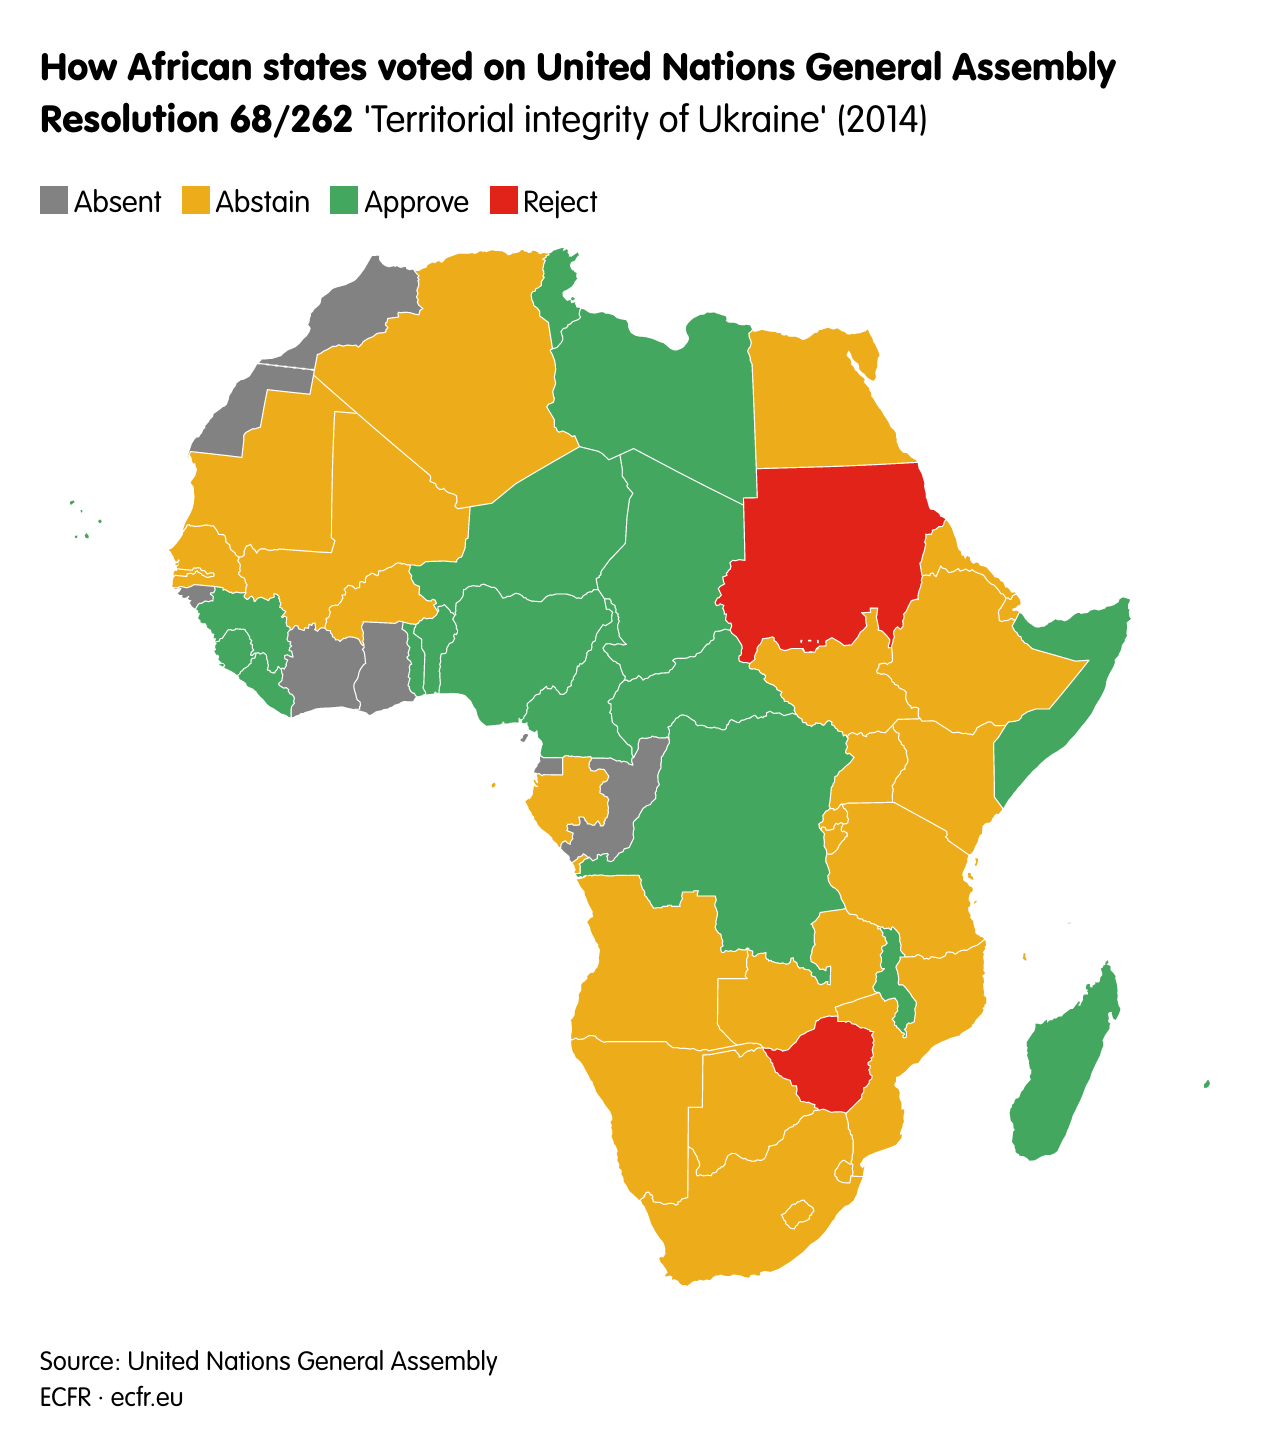 How African states voted on United Nations General Assembly Resolution 68/262